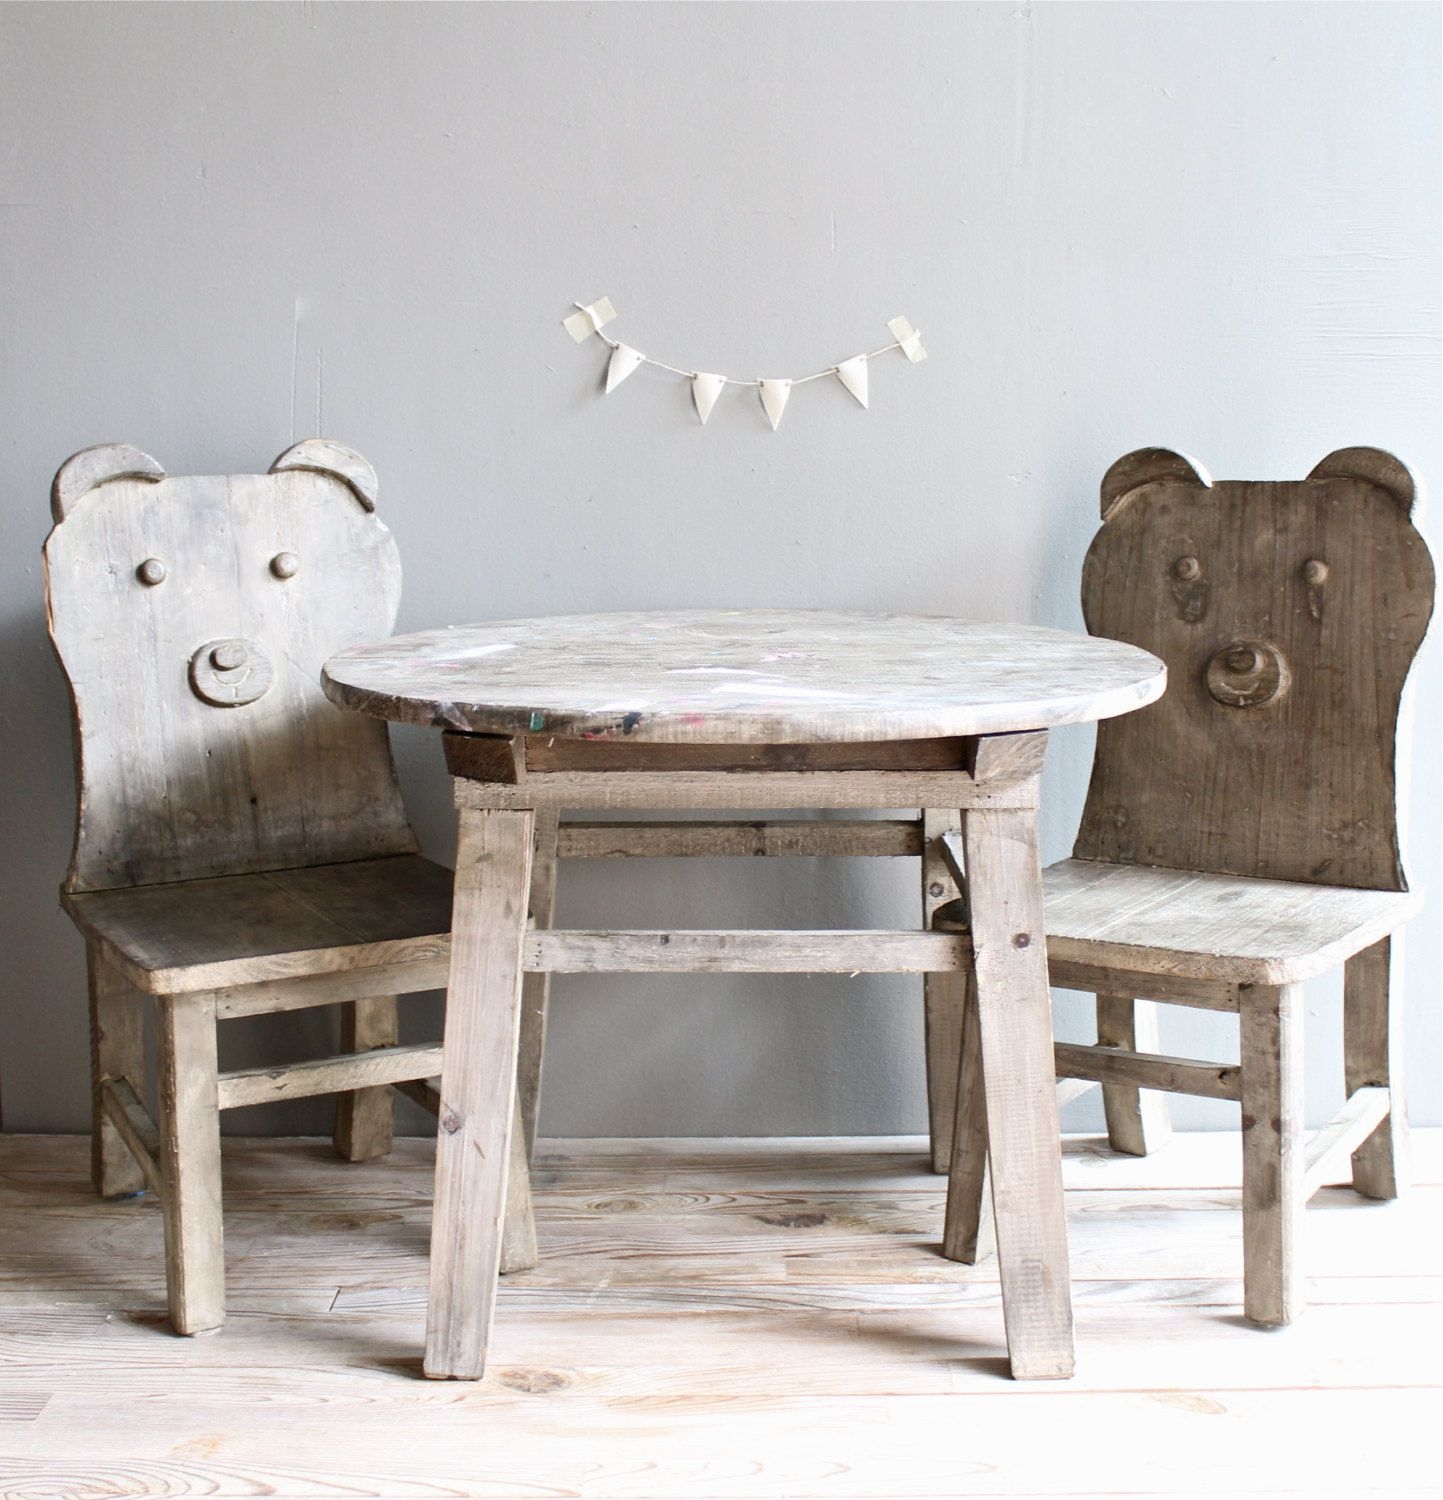 Wooden Childrens Table And Chairs   Ideas on Foter